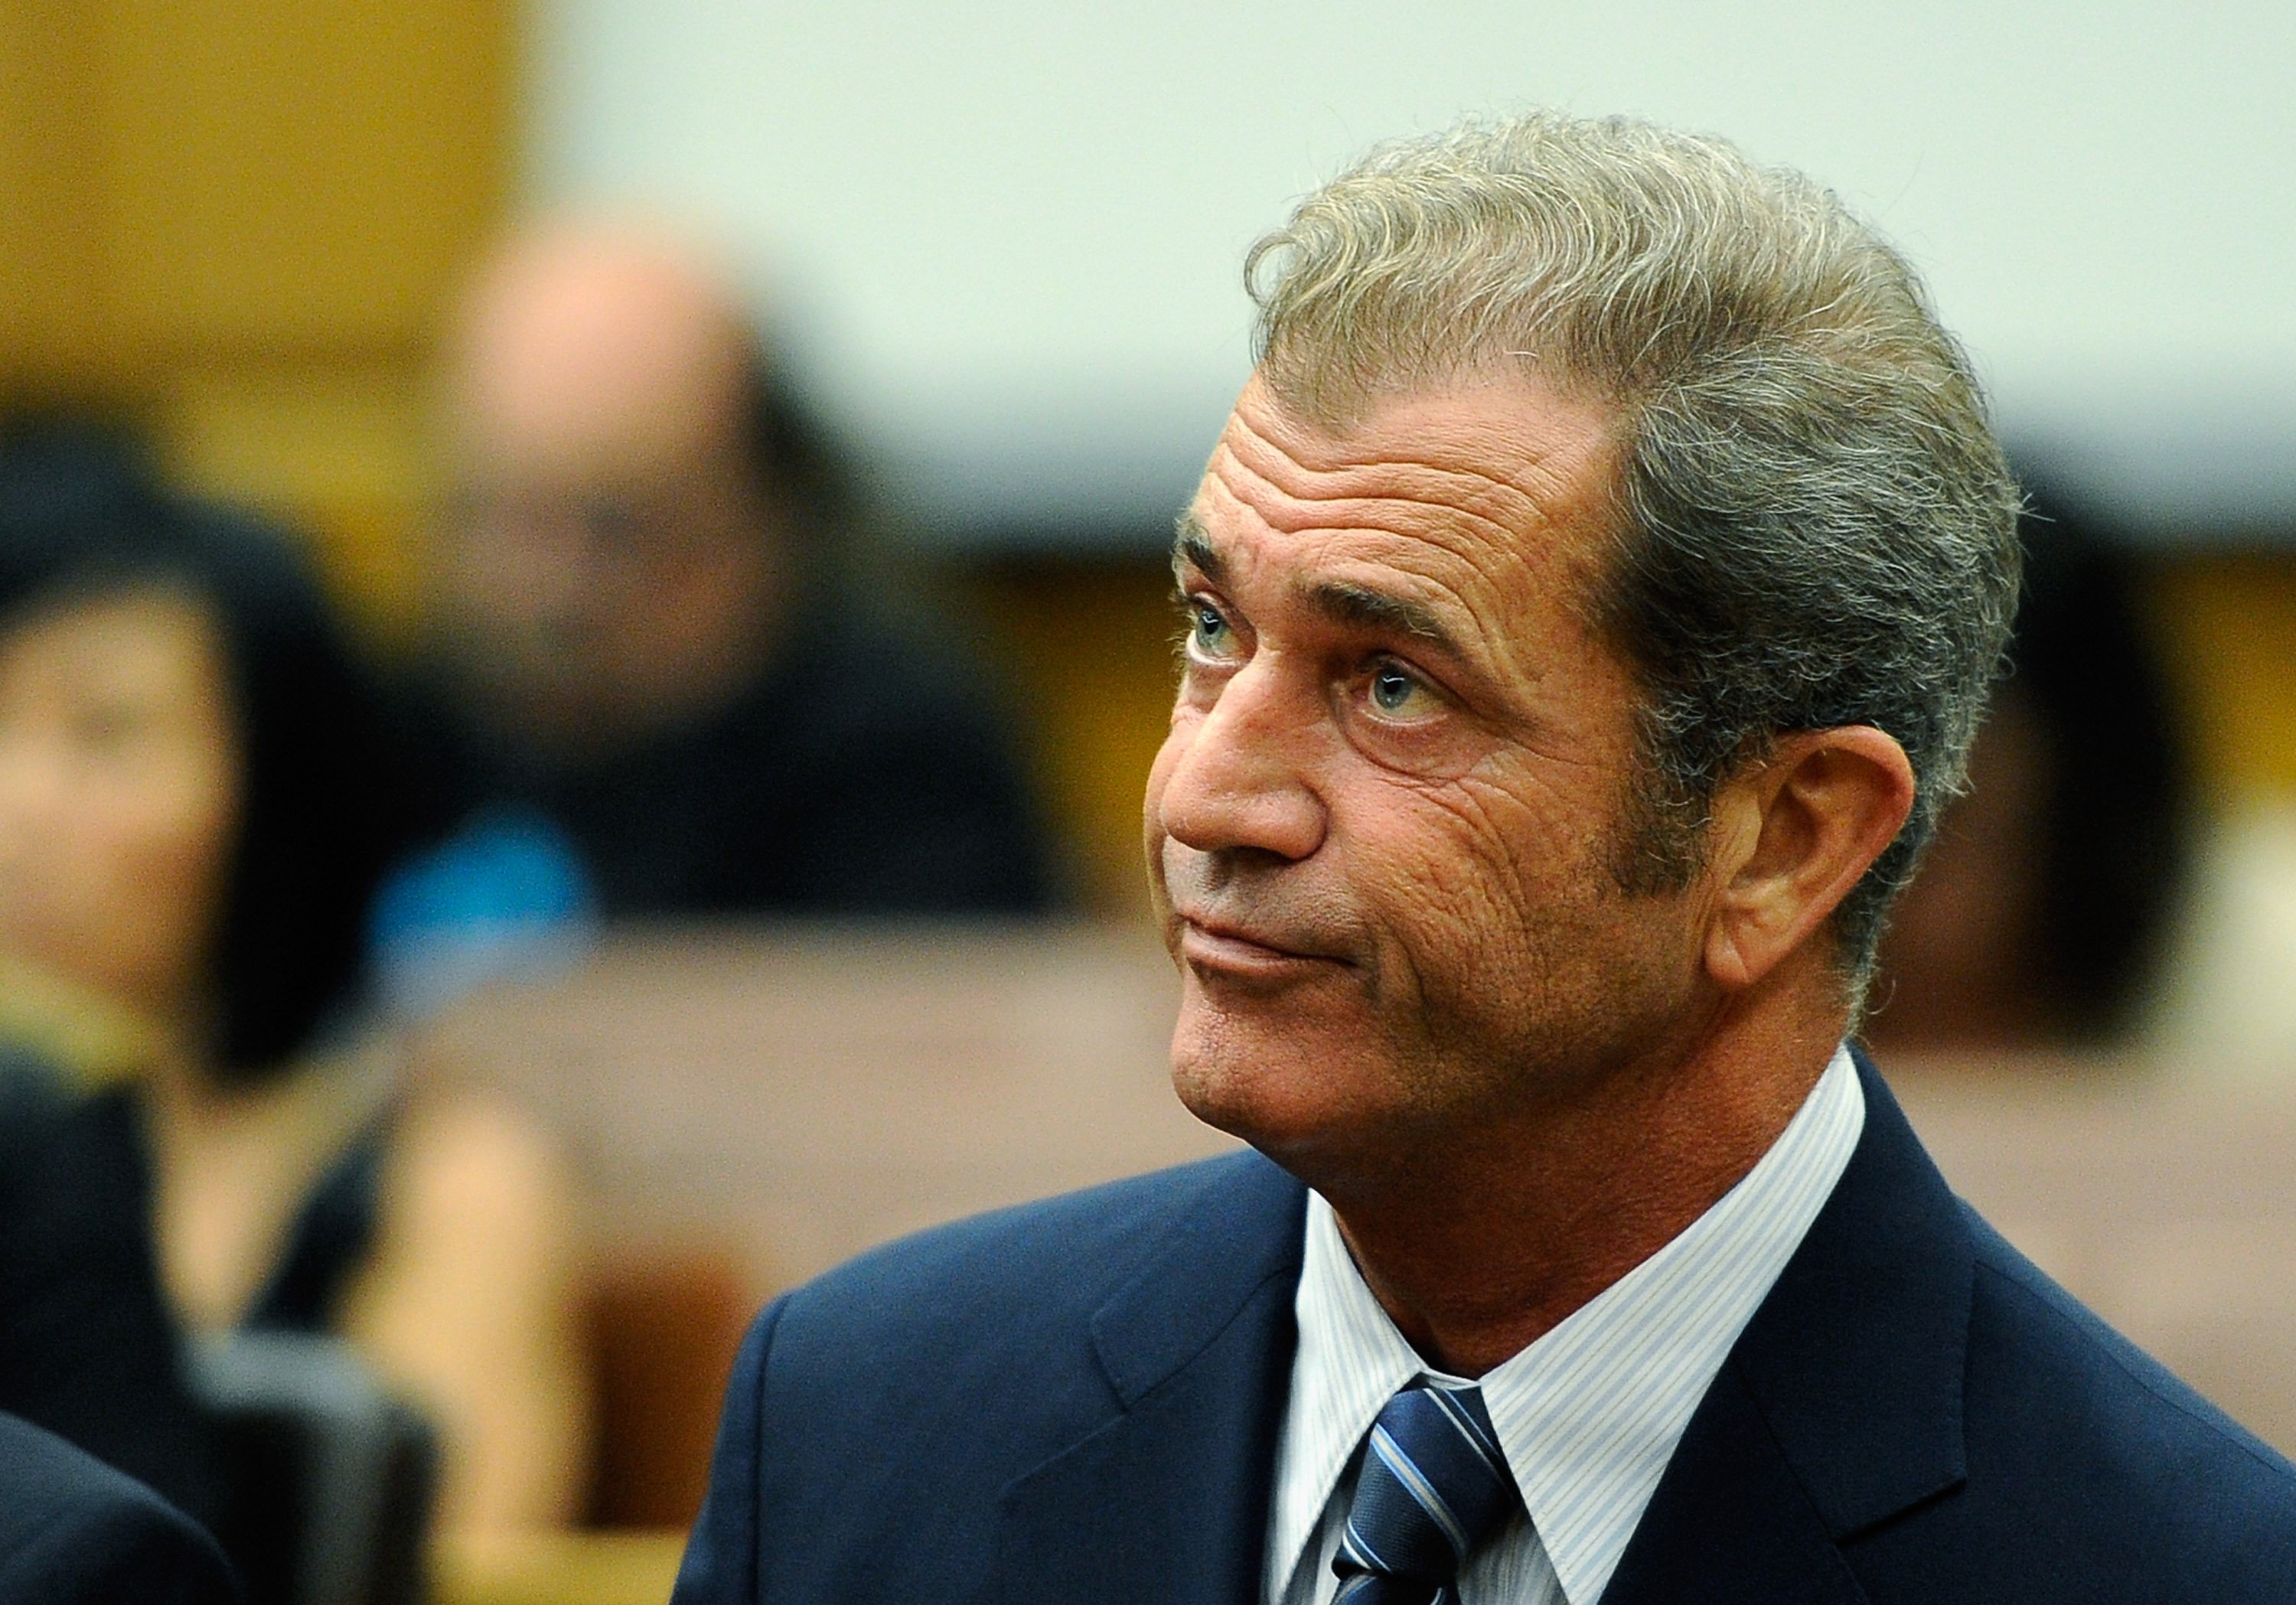 Mel Gibson during a hearing in a Los Angeles Superior Court on August 31, 2011 in Los Angeles, California. / Source: Getty Images